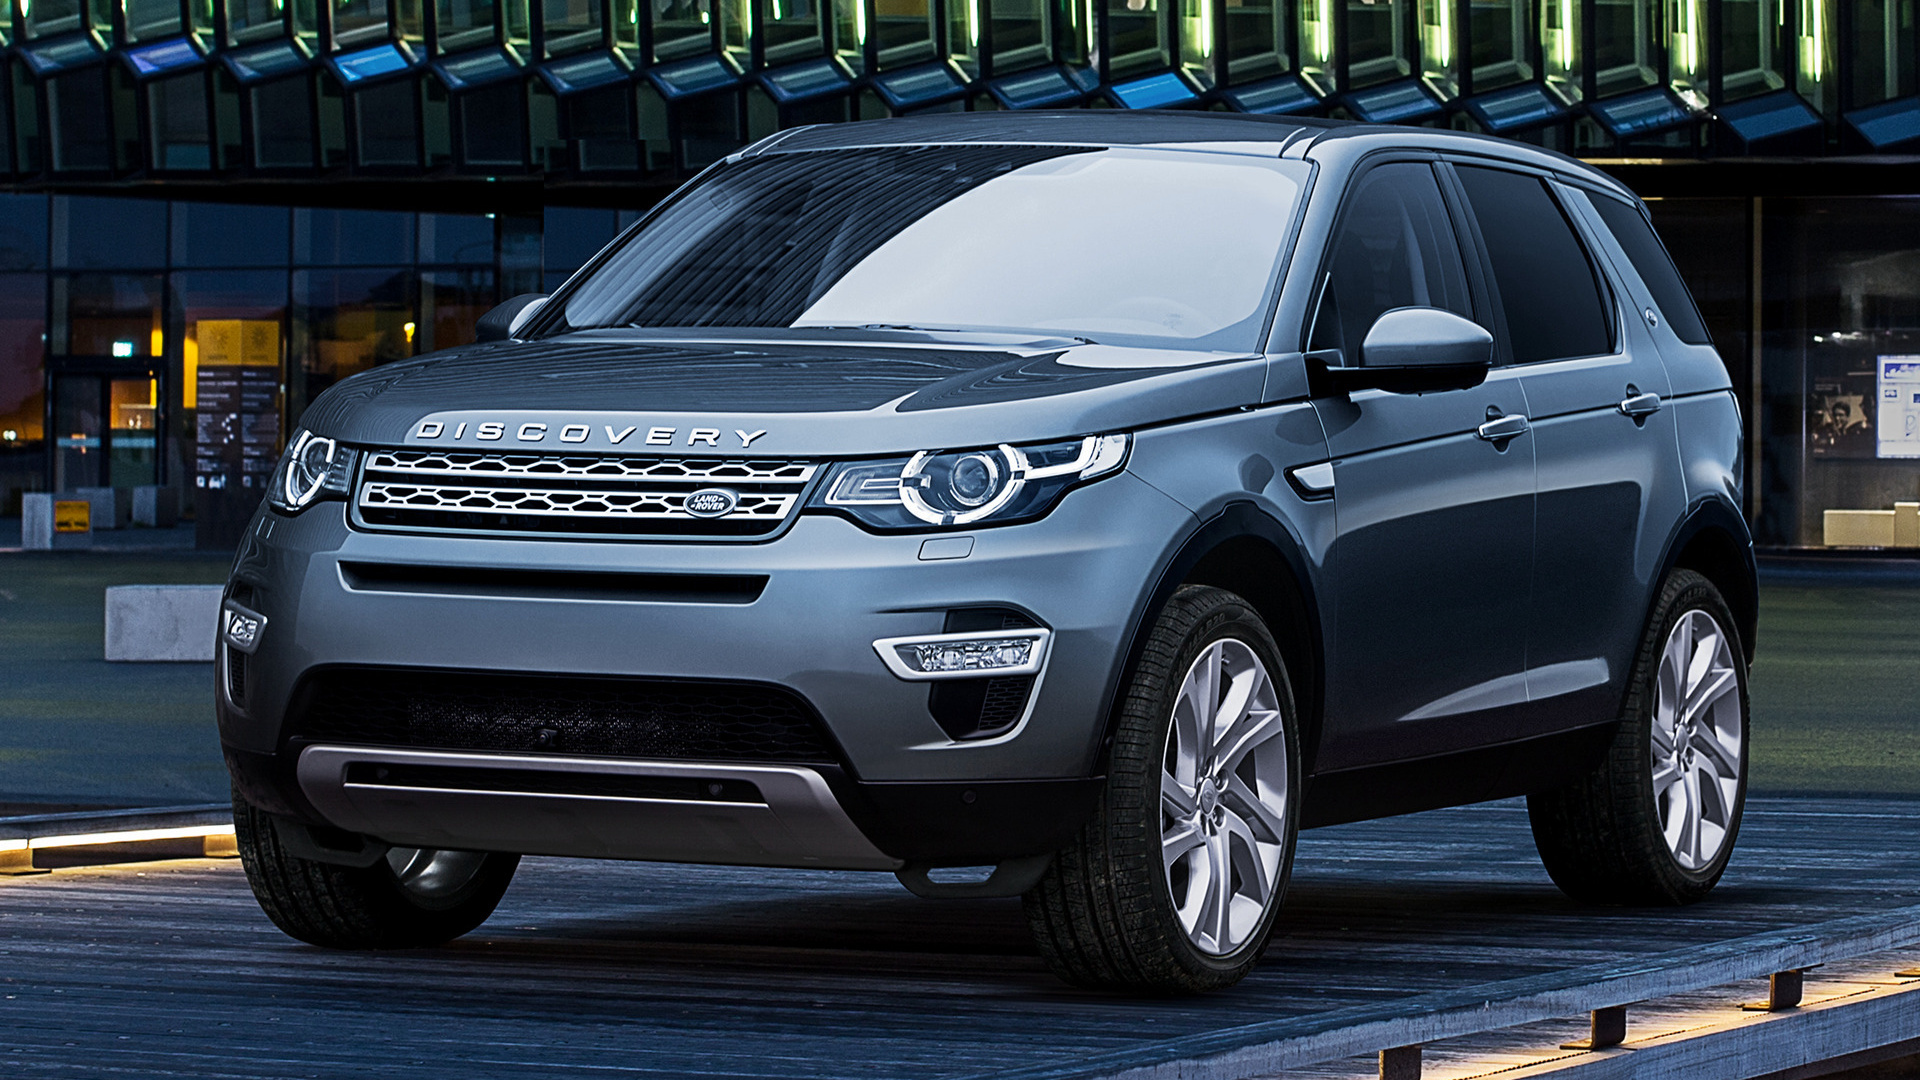 Land Rover Discovery, Auto excellence, Luxurious interiors, Adventure-ready, 1920x1080 Full HD Desktop